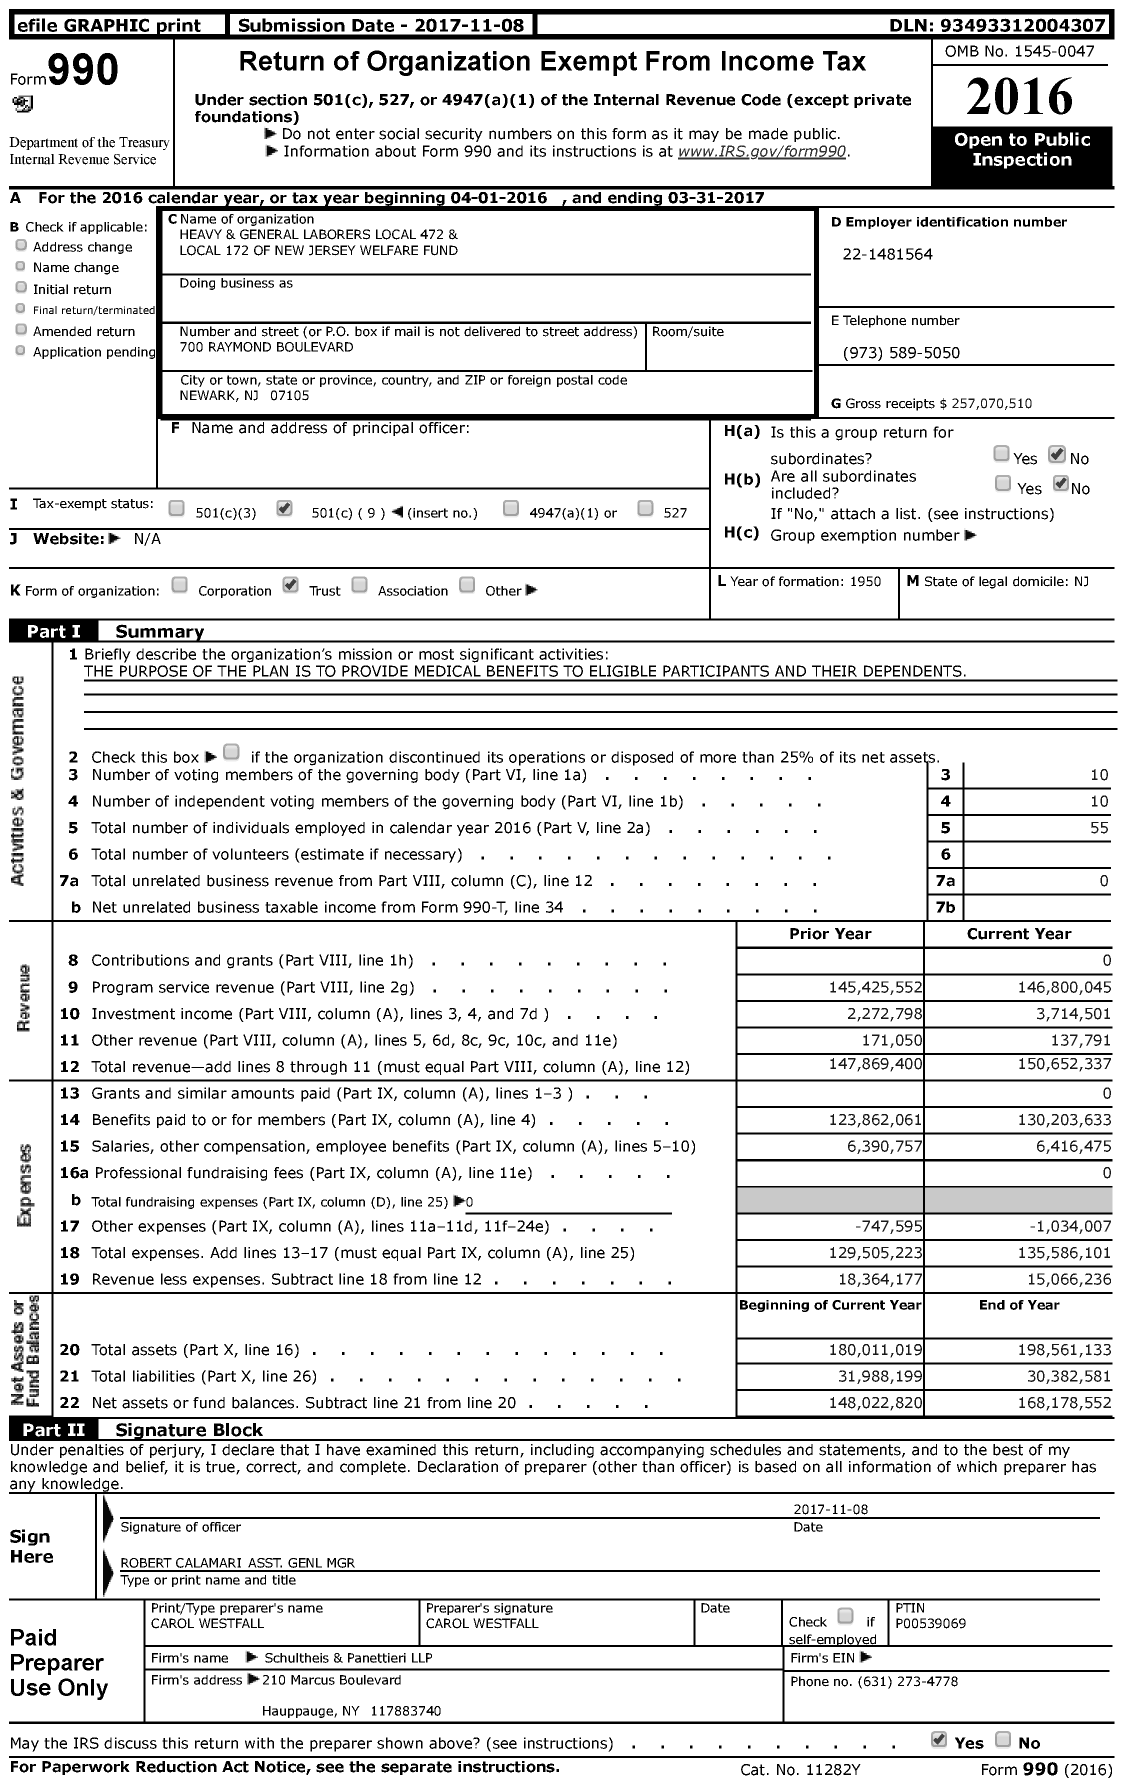 Image of first page of 2016 Form 990 for Heavy and General Laborers Local 472 and Local 172 of New Jersey Welfare Fund